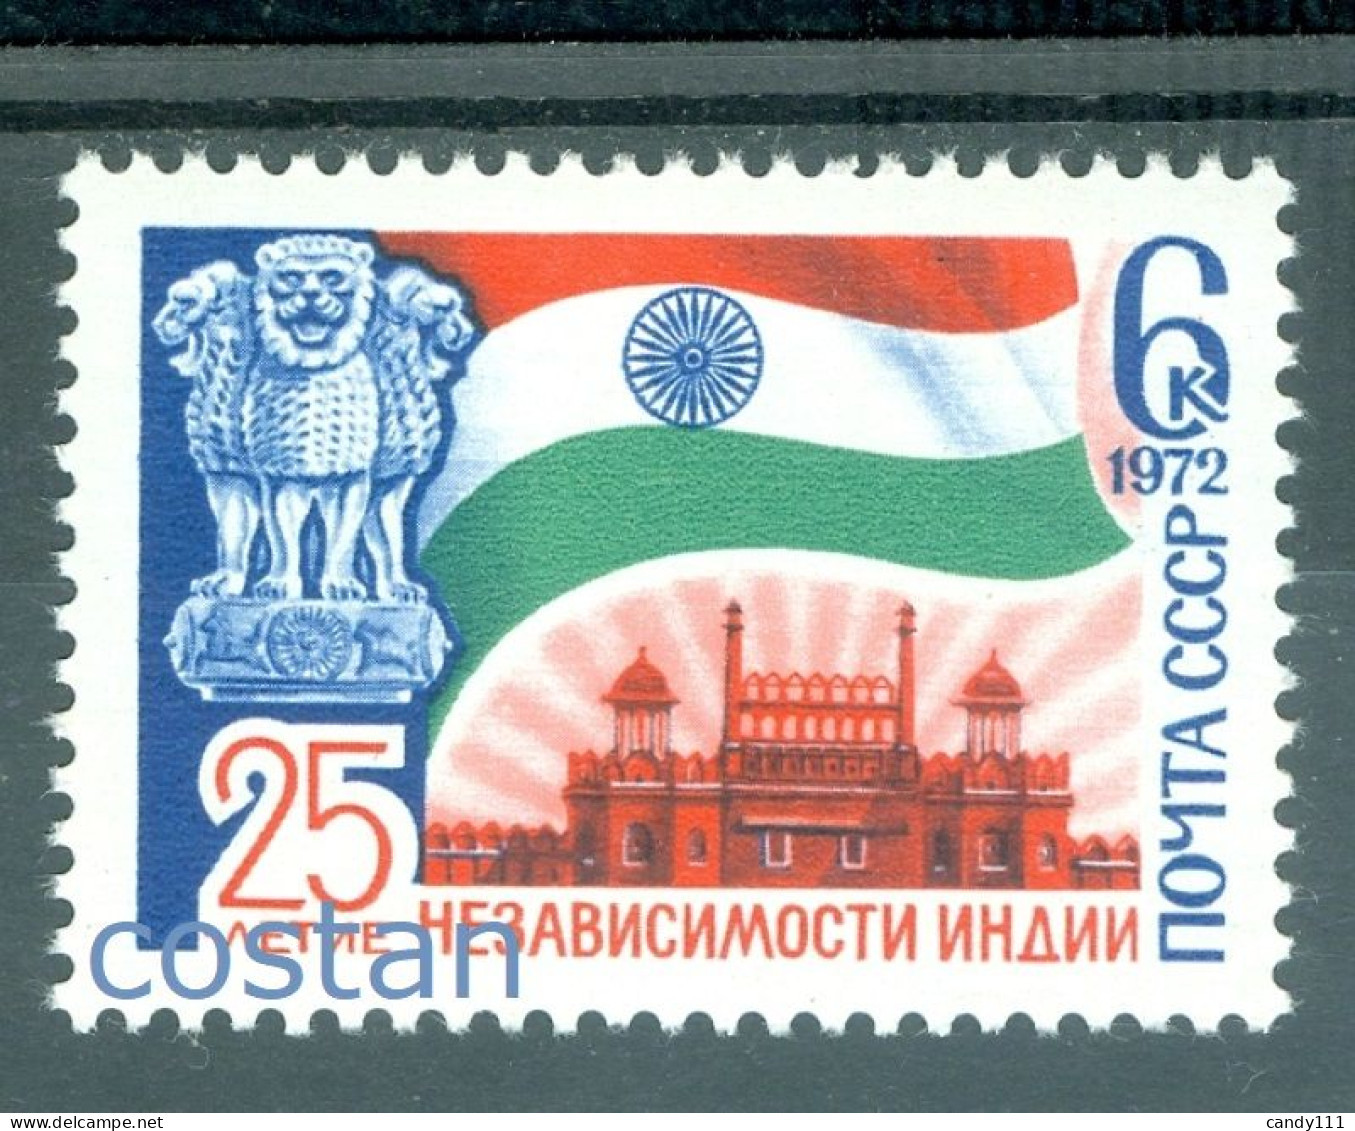 1972 INDIA Independence,Lion Capital,Flag,Red Fort/Lal Qila,Delhi,Russia,4031MNH - Castelli